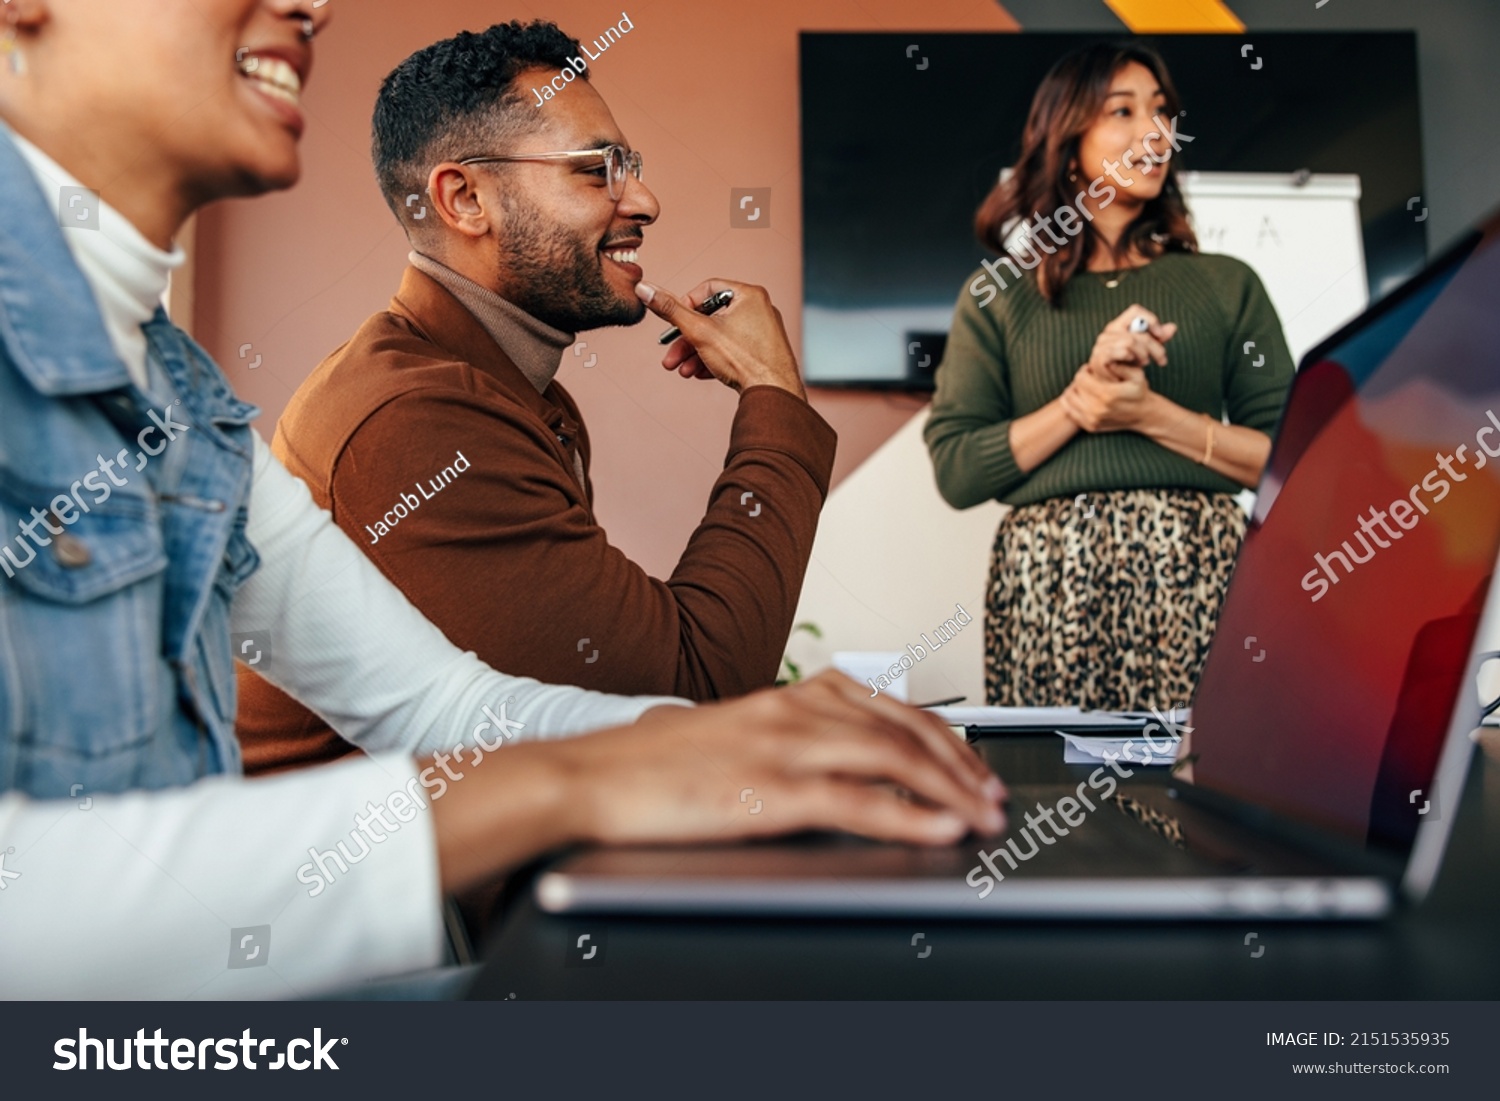 Group of diverse businesspeople having a meeting in a boardroom. Young businesspeople smiling happily during a discussion. Multiethnic businesspeople working together as a team. #2151535935